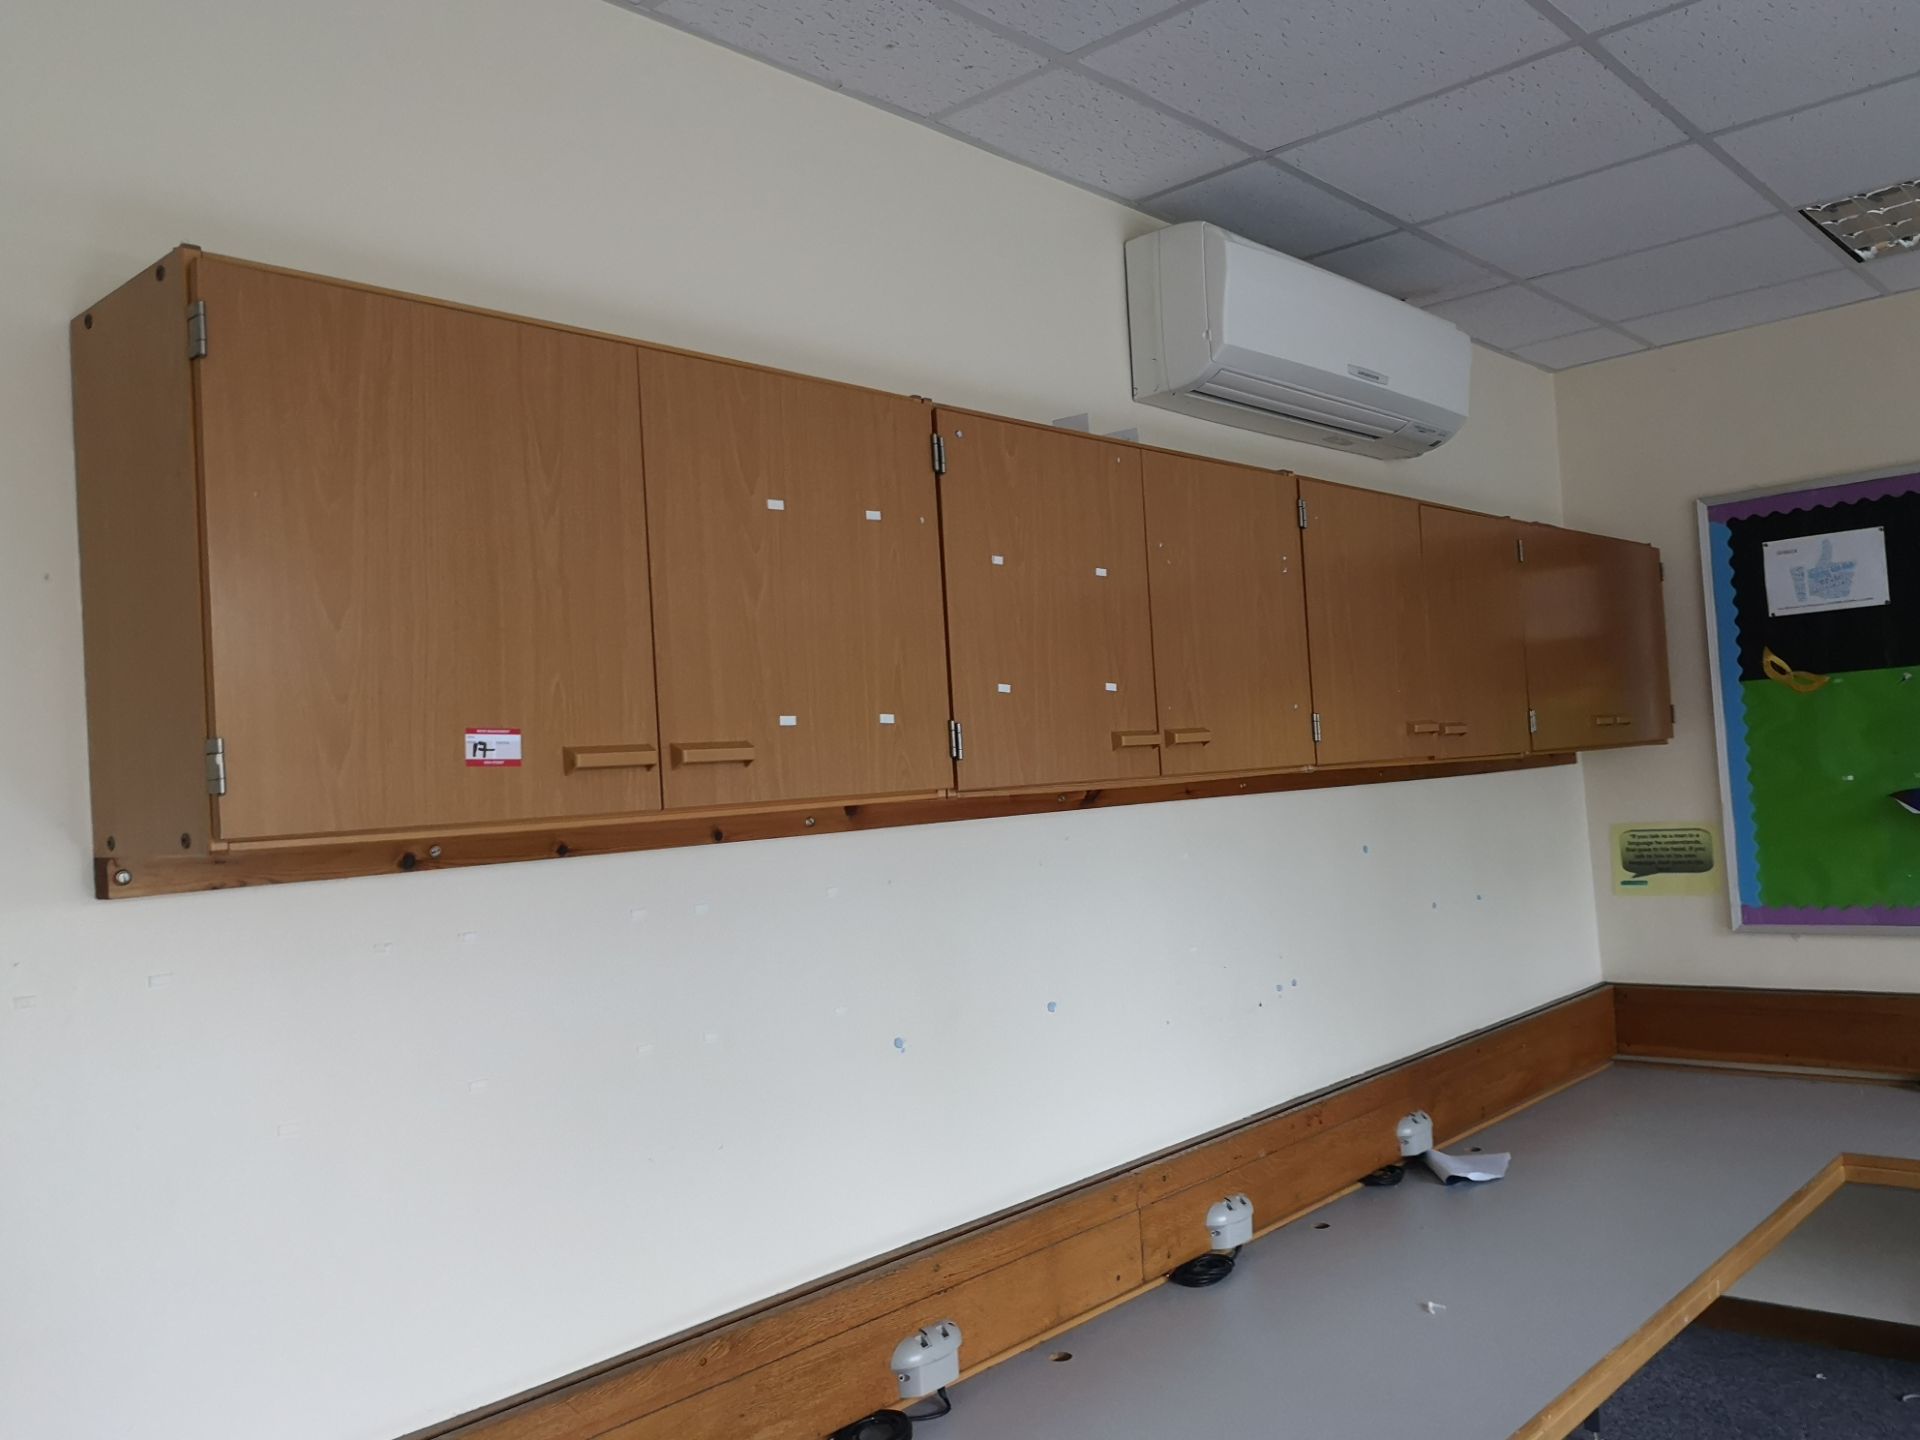 4x wall mounted cabinets 50cm by 100cm - Image 3 of 3